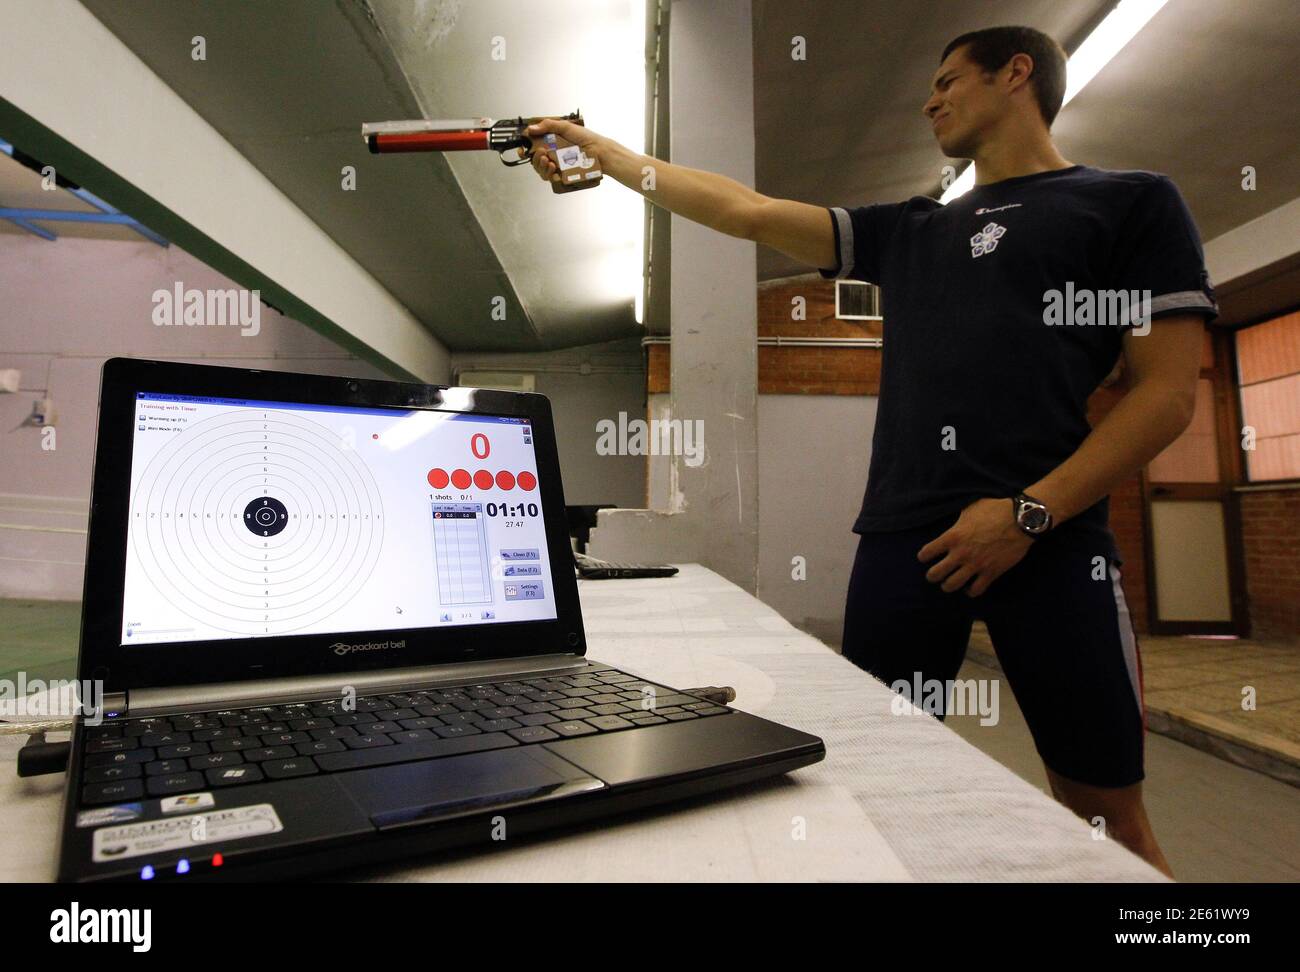 Pier Paolo Petroni, Italian pentathlon athlete, prepares to shoot during the training session at the shooting range in Montelibretti, outside Rome April 3, 2012. Laser guns will replace traditional air pistols in the modern pentathlon at the 2012 London Olympics.  REUTERS/Alessandro Bianchi (ITALY - Tags: SPORT OLYMPICS MODERN PENTATHLON) Stock Photo